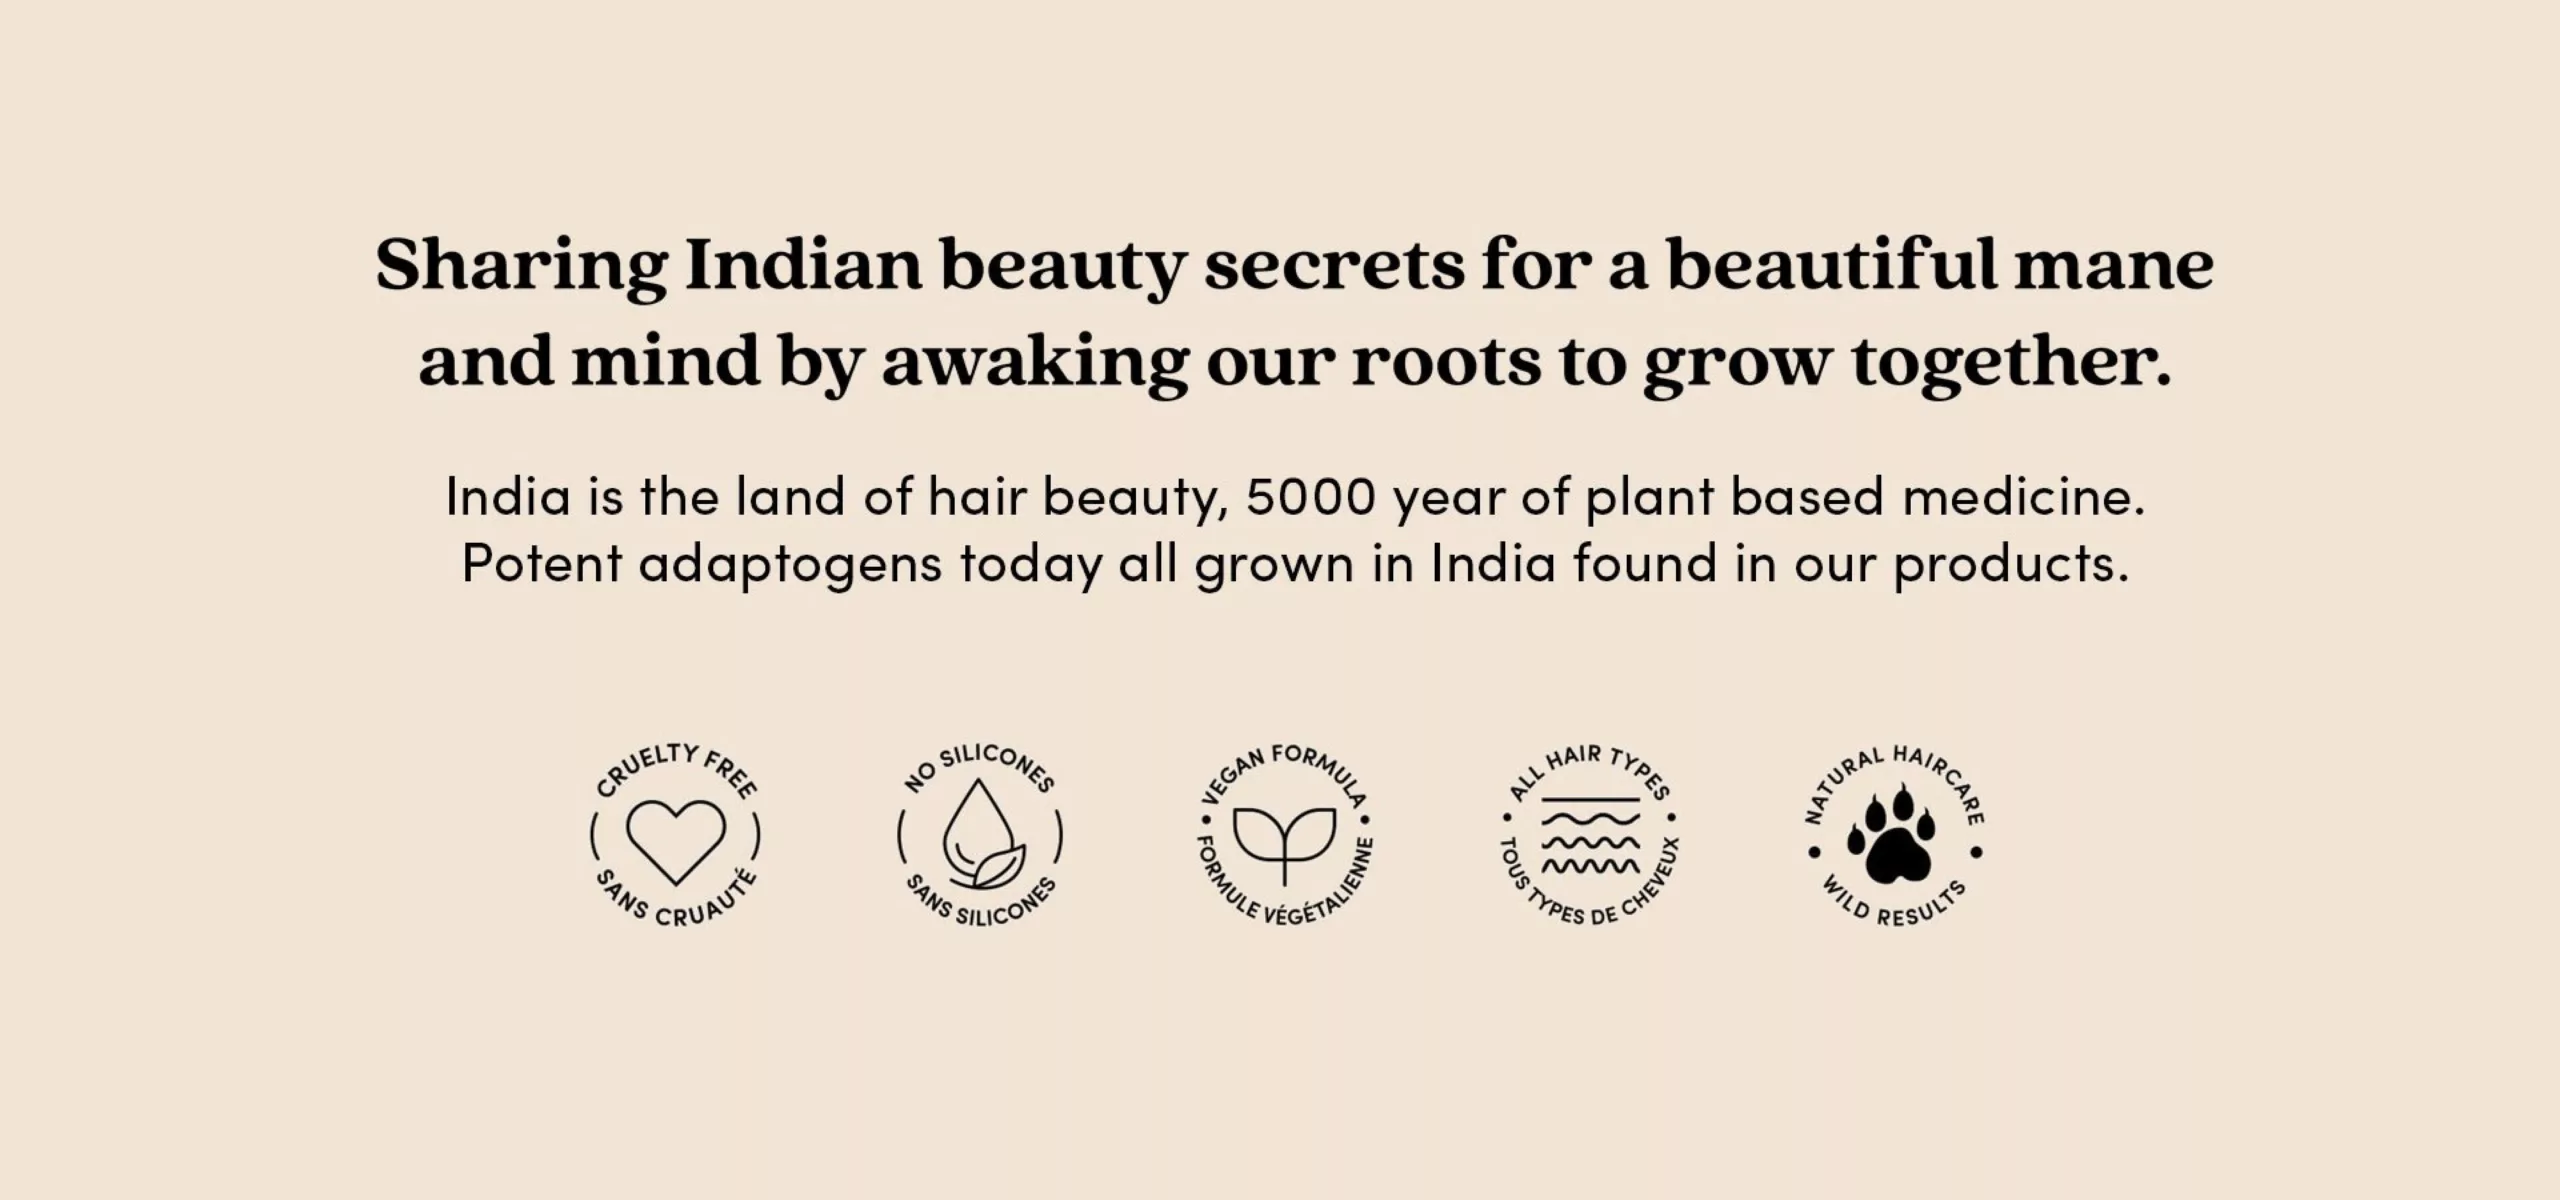 Discover ancient Indian beauty secrets for a beautiful mind and body by embracing our roots and growing together